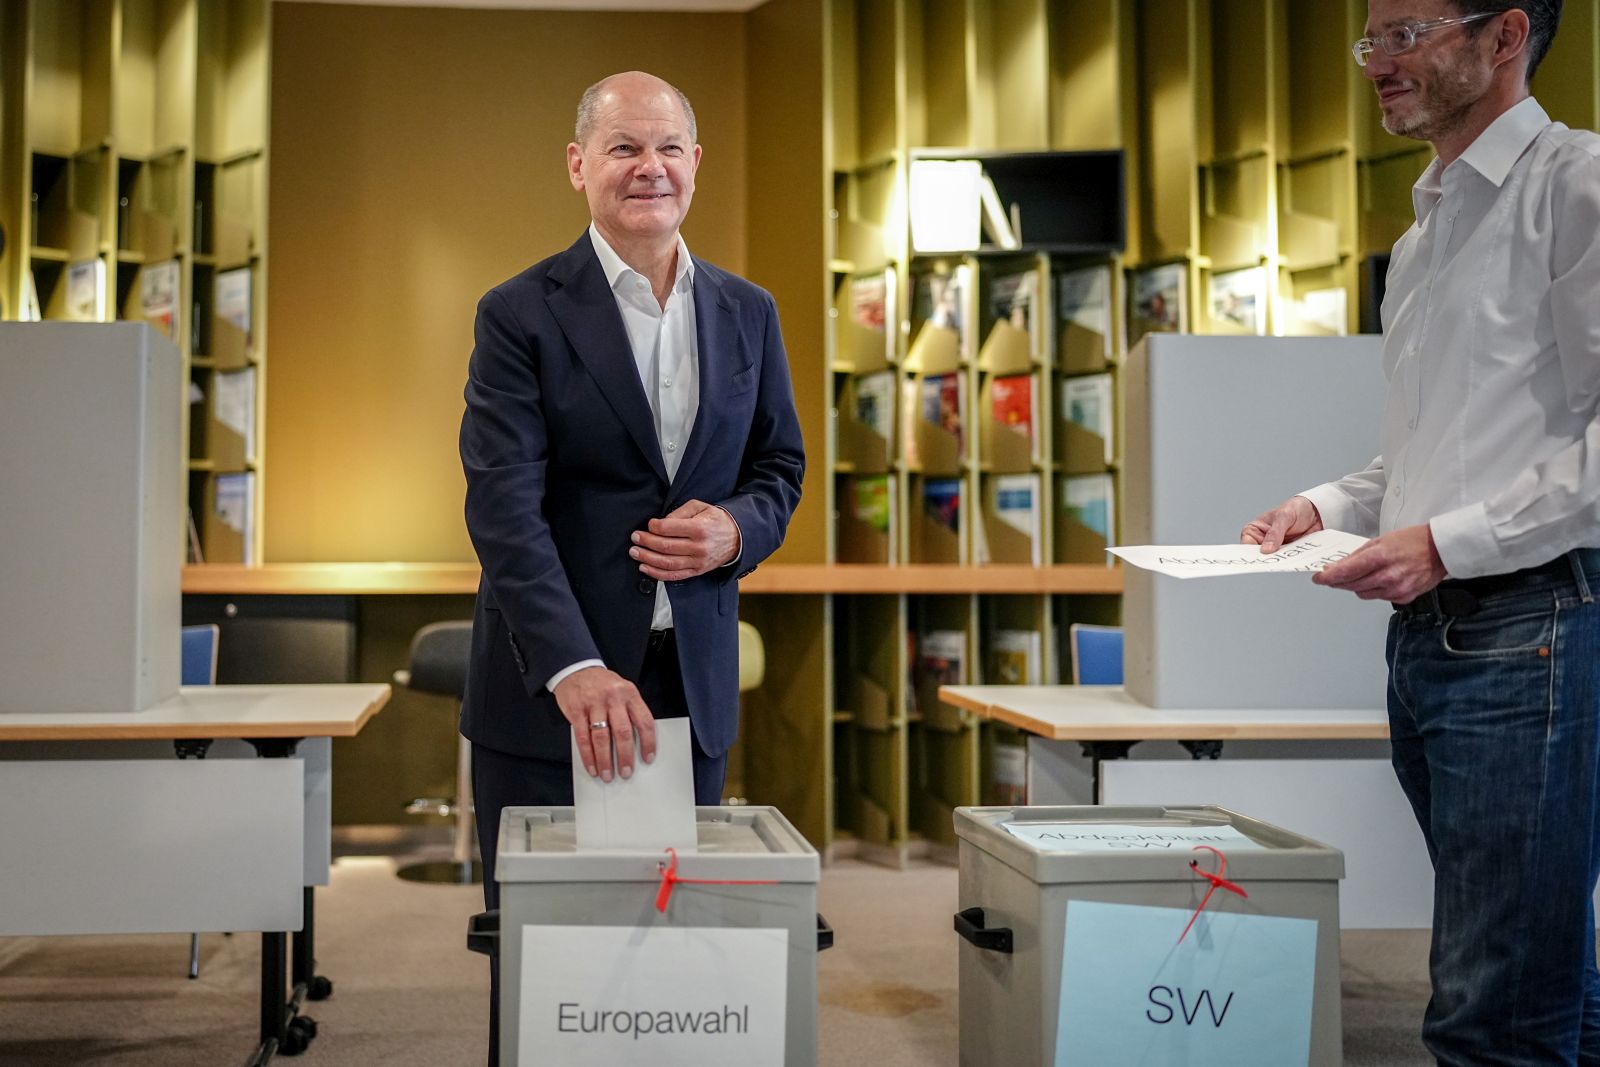 epa11399616 German Chancellor Olaf Scholz (SPD) casts his ballot for the European elections at a polling station in Potsdam, Germany, 09 June 2024. The European Parliament elections take place across EU member states from 06 to 09 June 2024.  EPA/KAY NIETFELD  / POOL